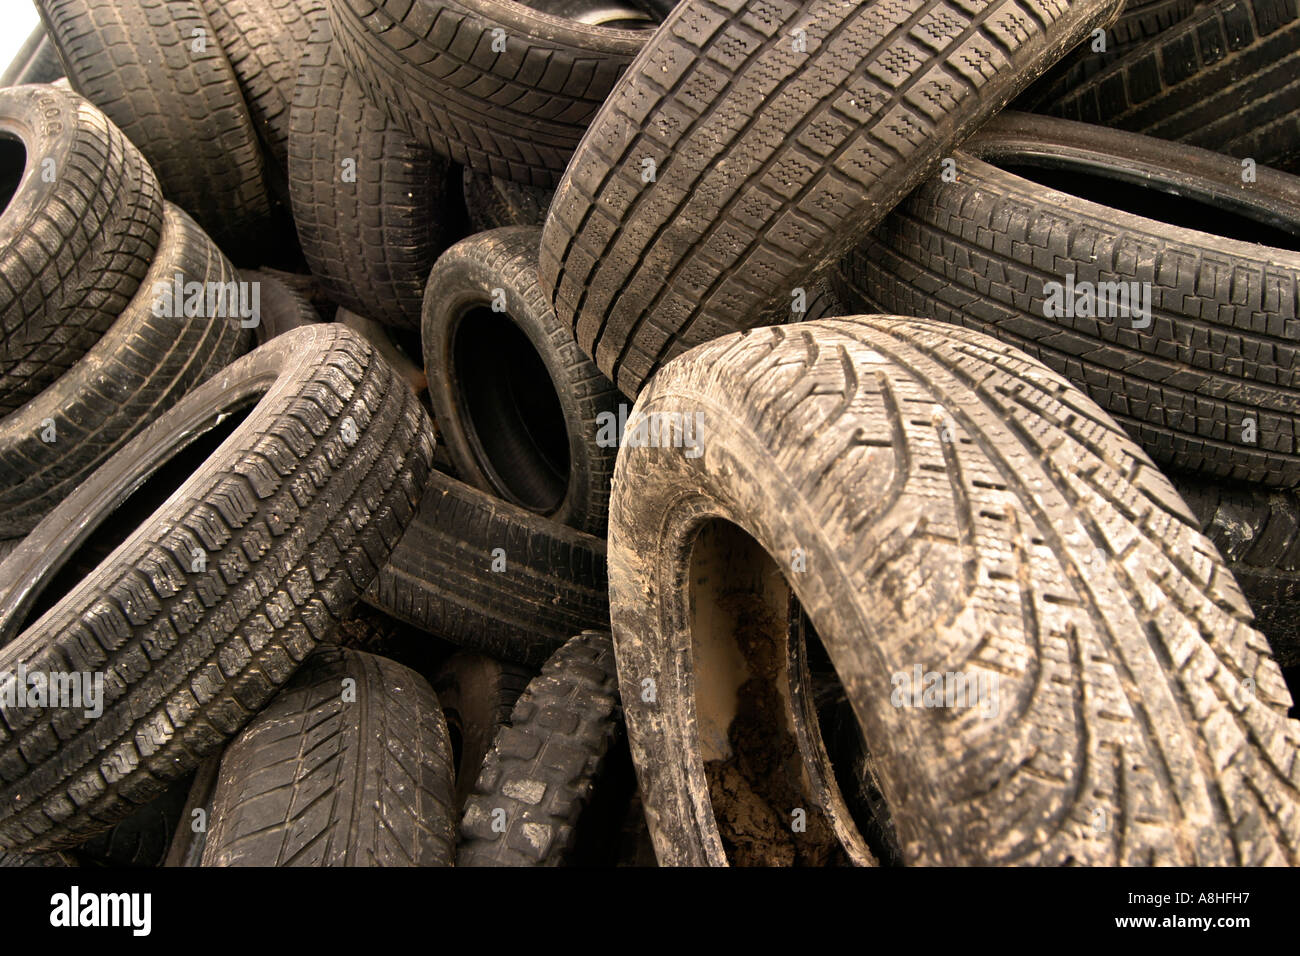 Old motor-car tires on a garbage depot Stock Photo